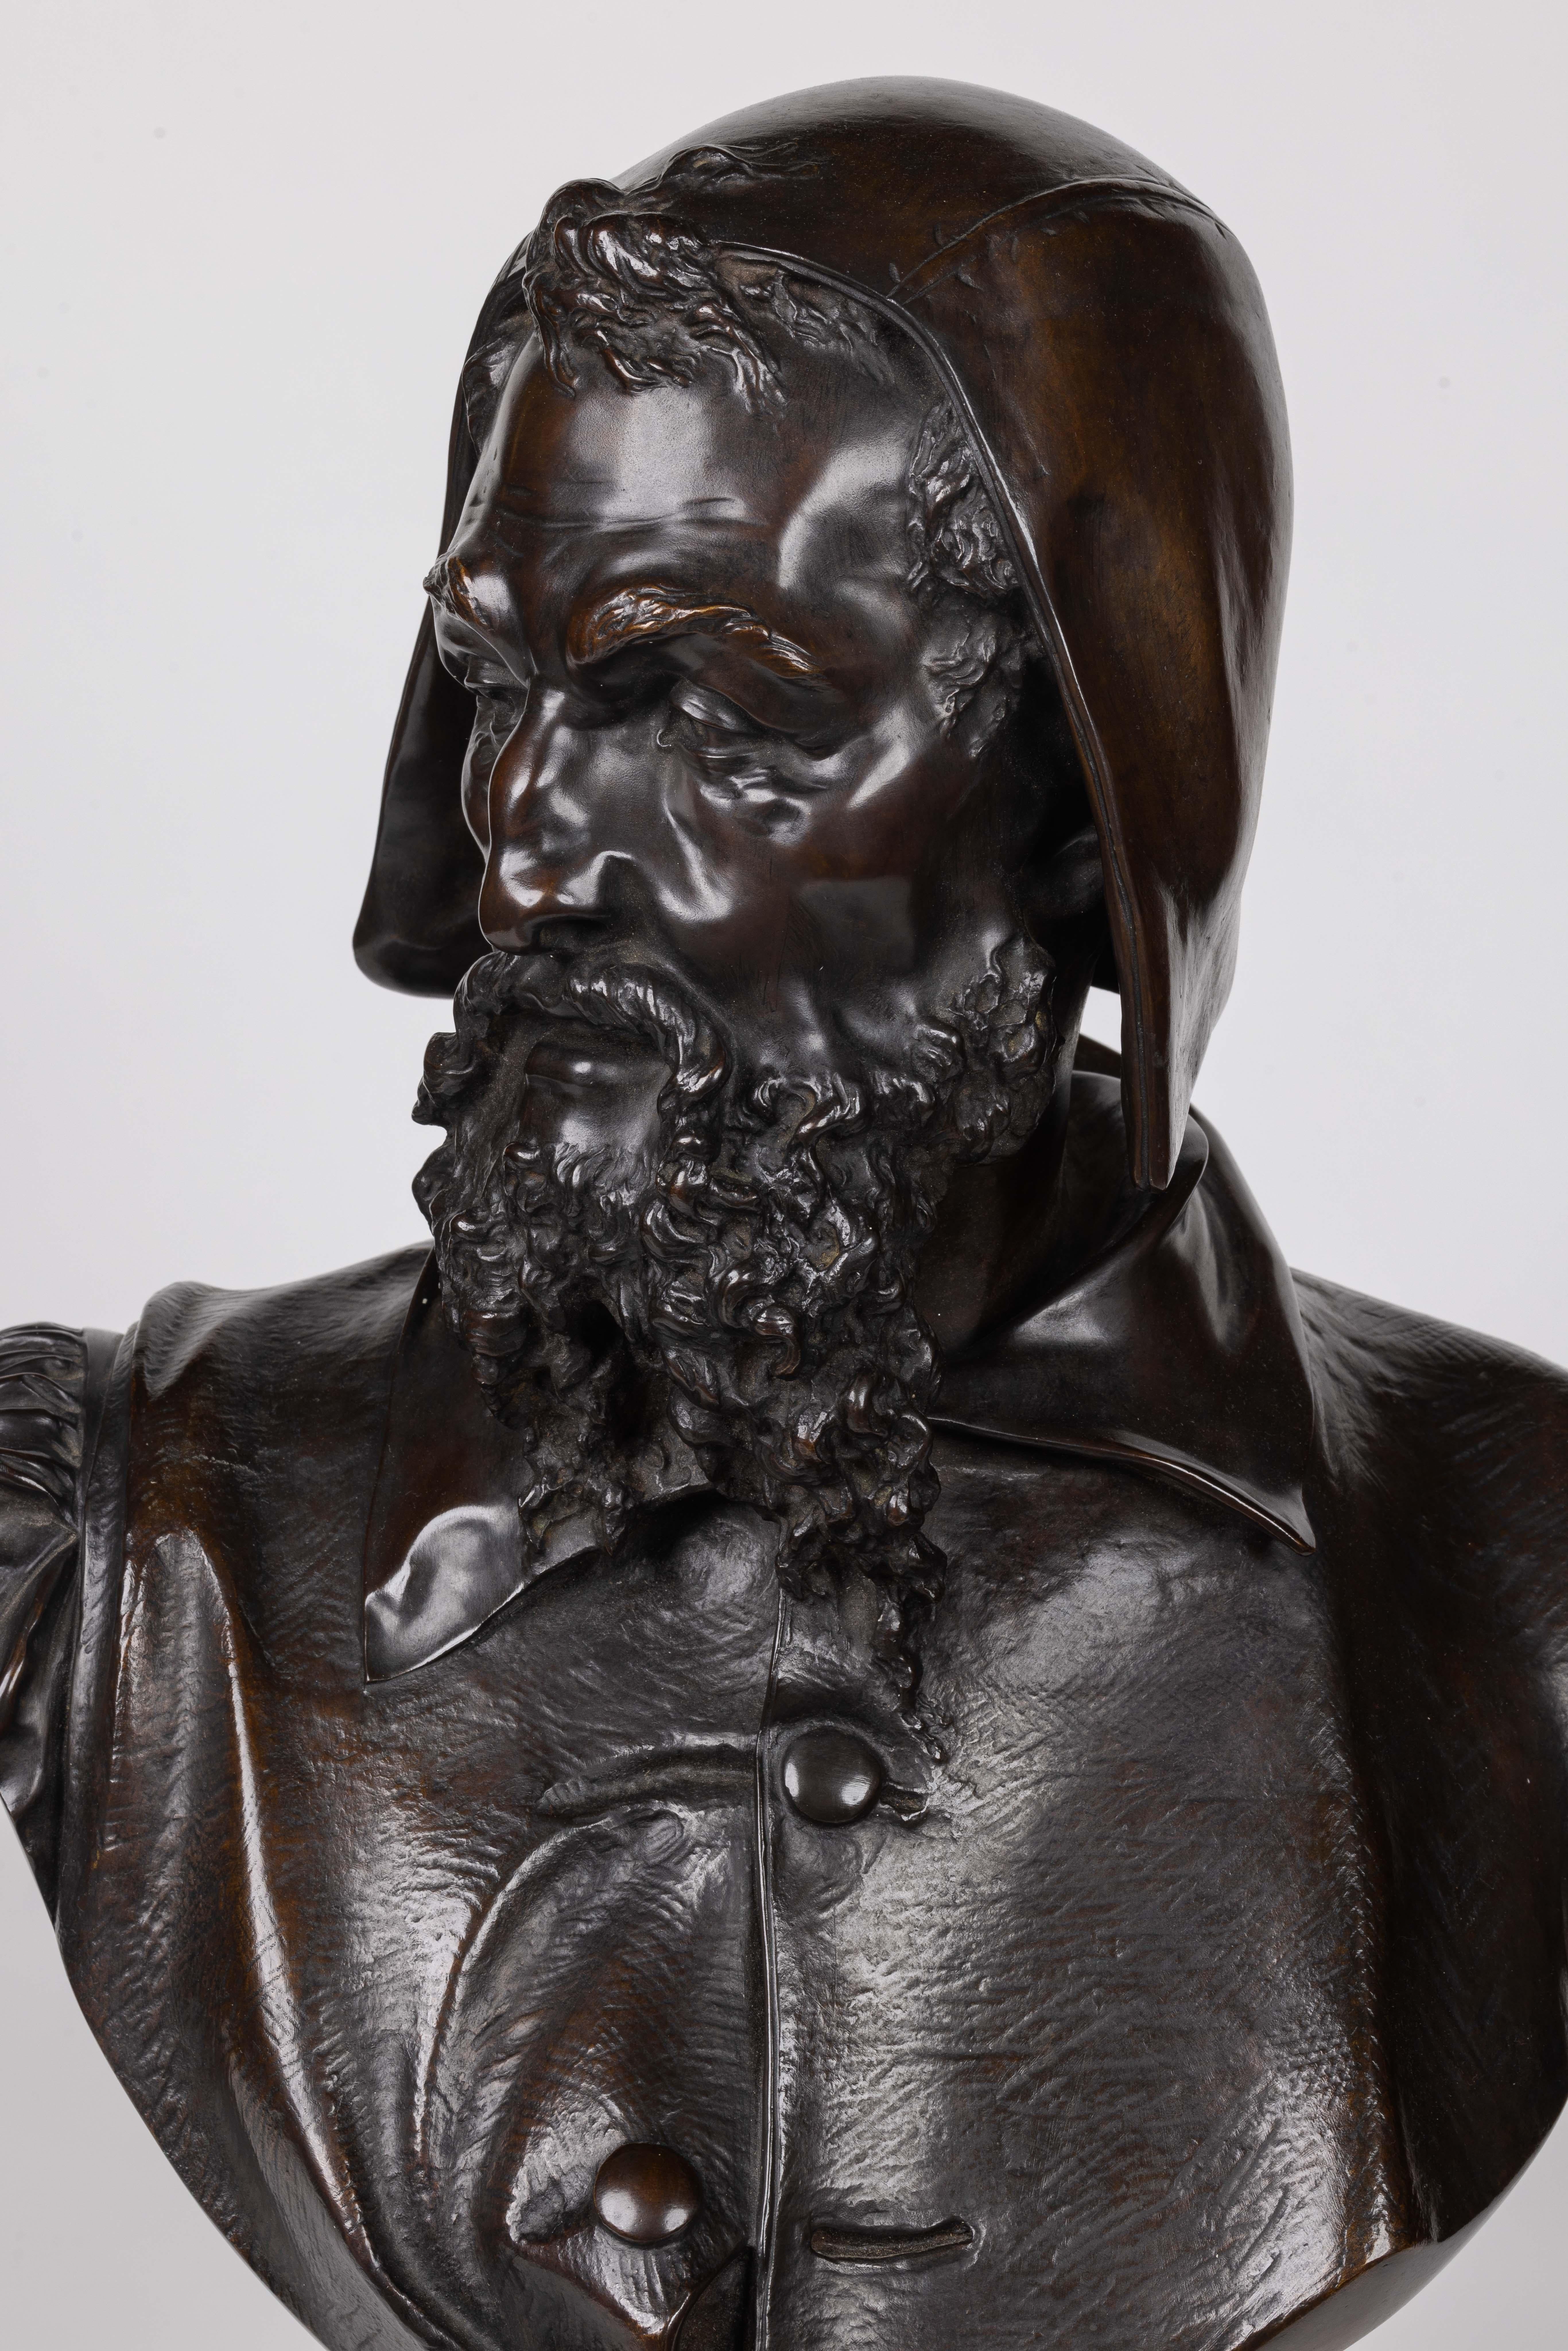 19th Century Albert-Ernest Carrier-Belleuse, A Rare and Important Bronze Bust of Michelangelo For Sale